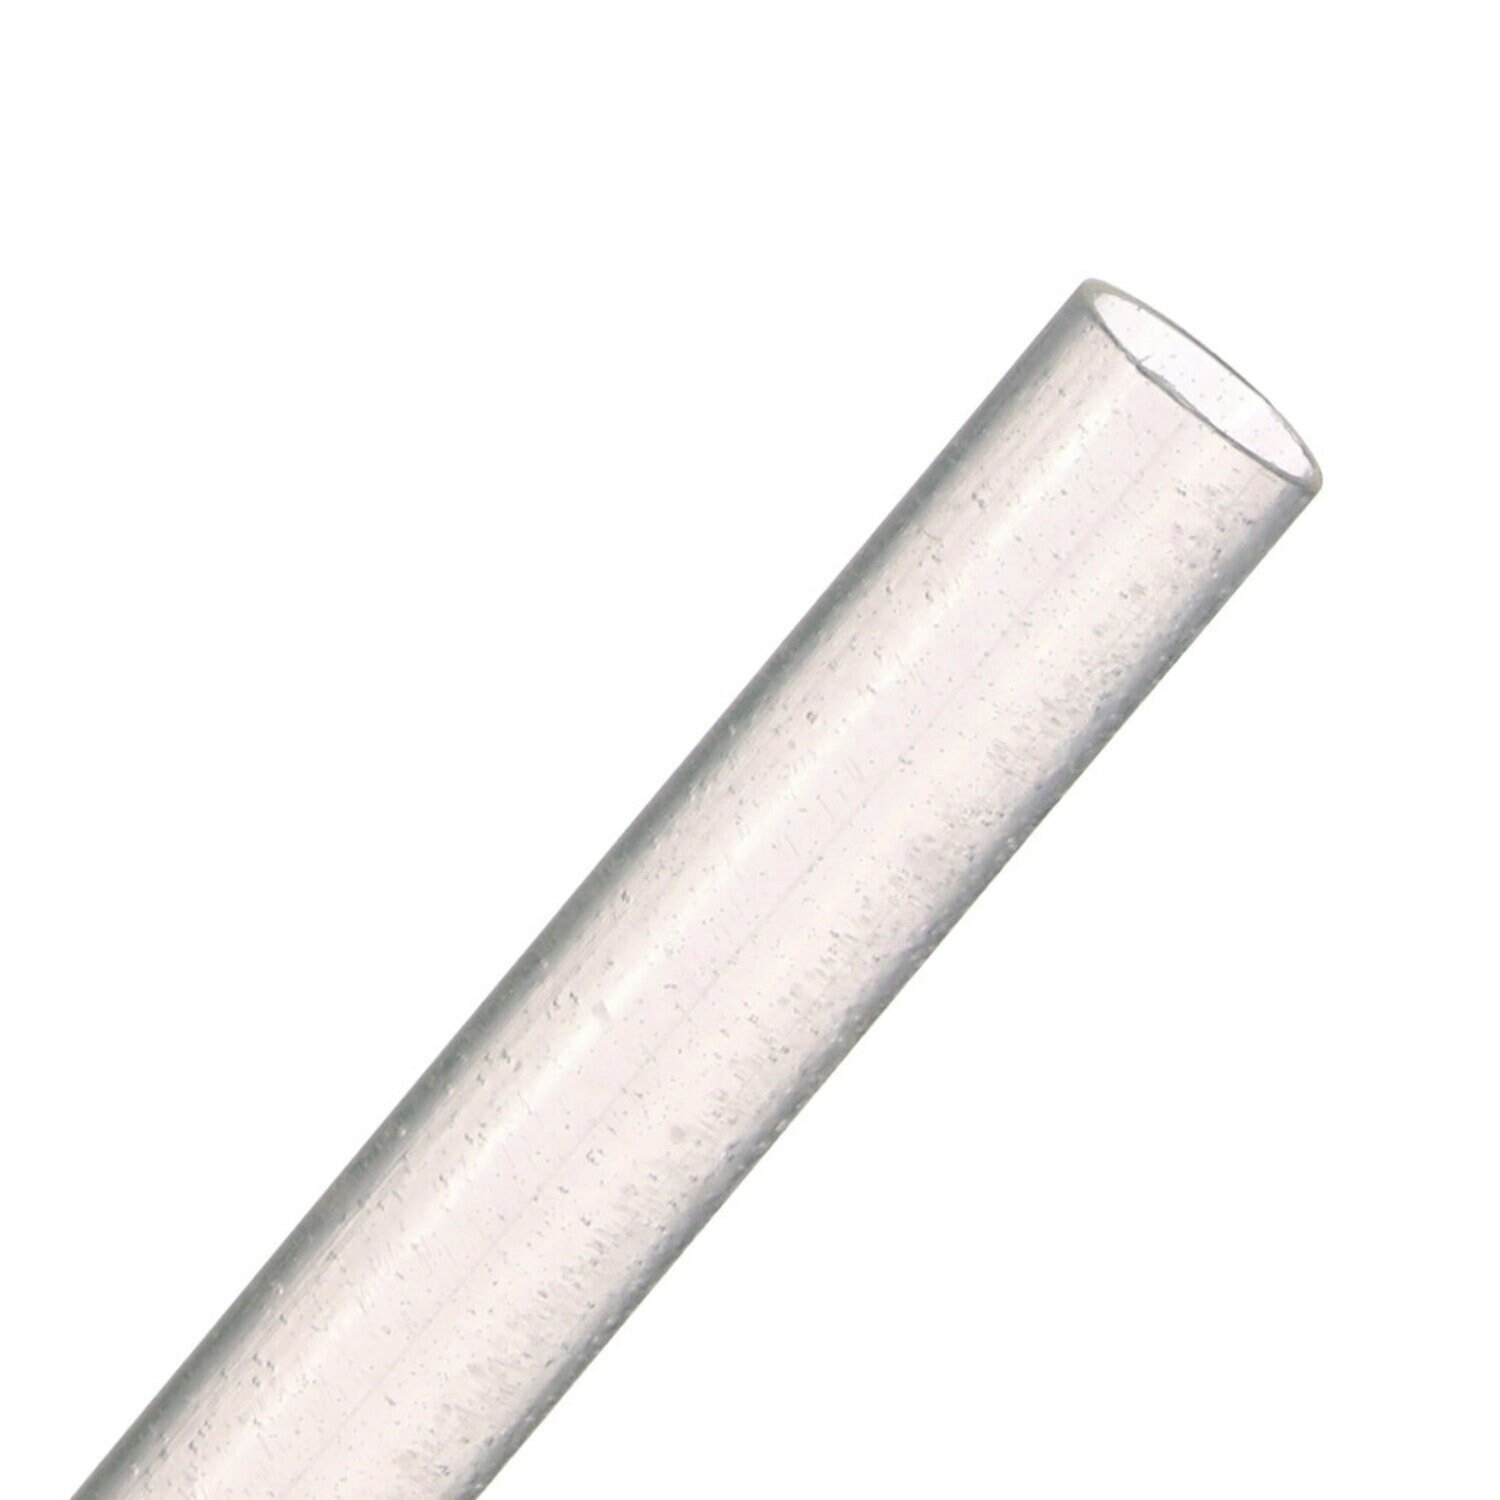 7010297796 - 3M Thin-Wall Heat Shrink Tubing EPS-300, Adhesive-Lined,
1/4-48"-Clear-200 Pcs, 48 in length sticks, 200 pieces/case